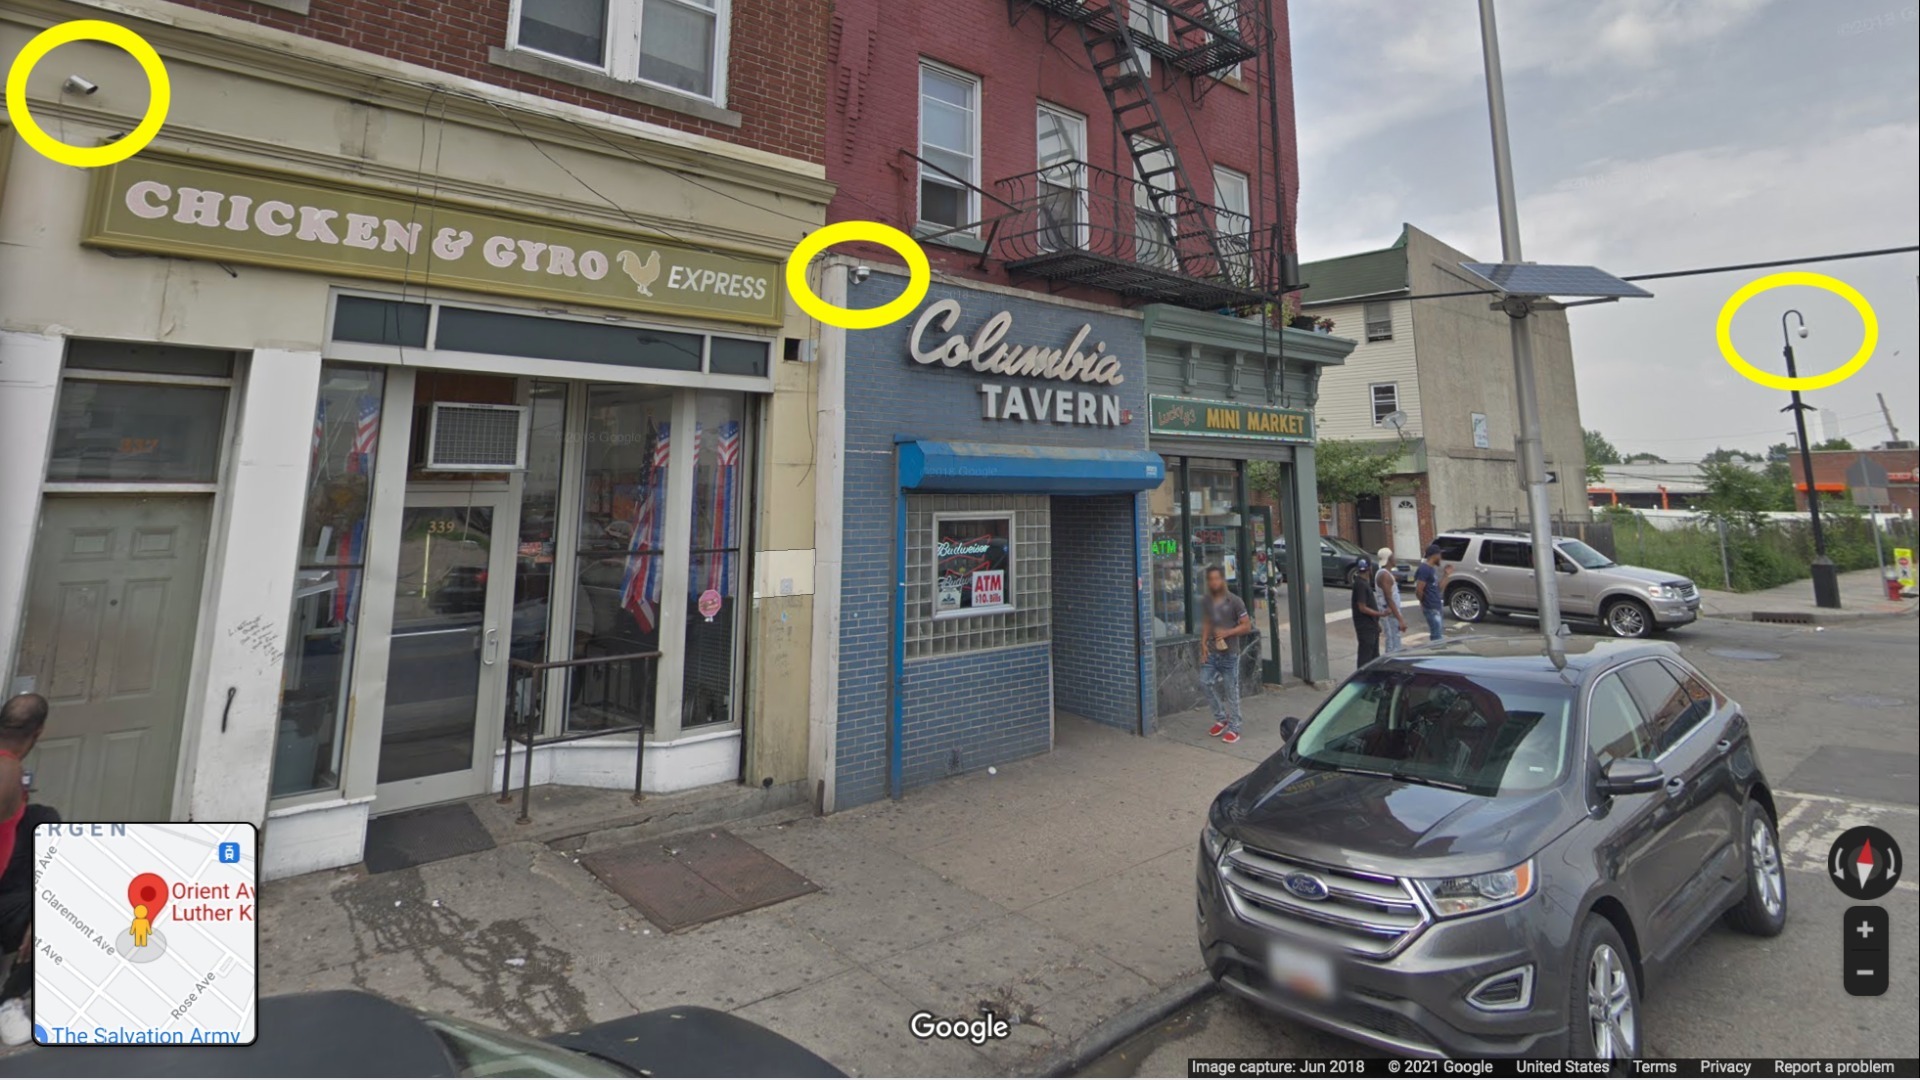 June 2018 Google image of cameras at MLK and Orient